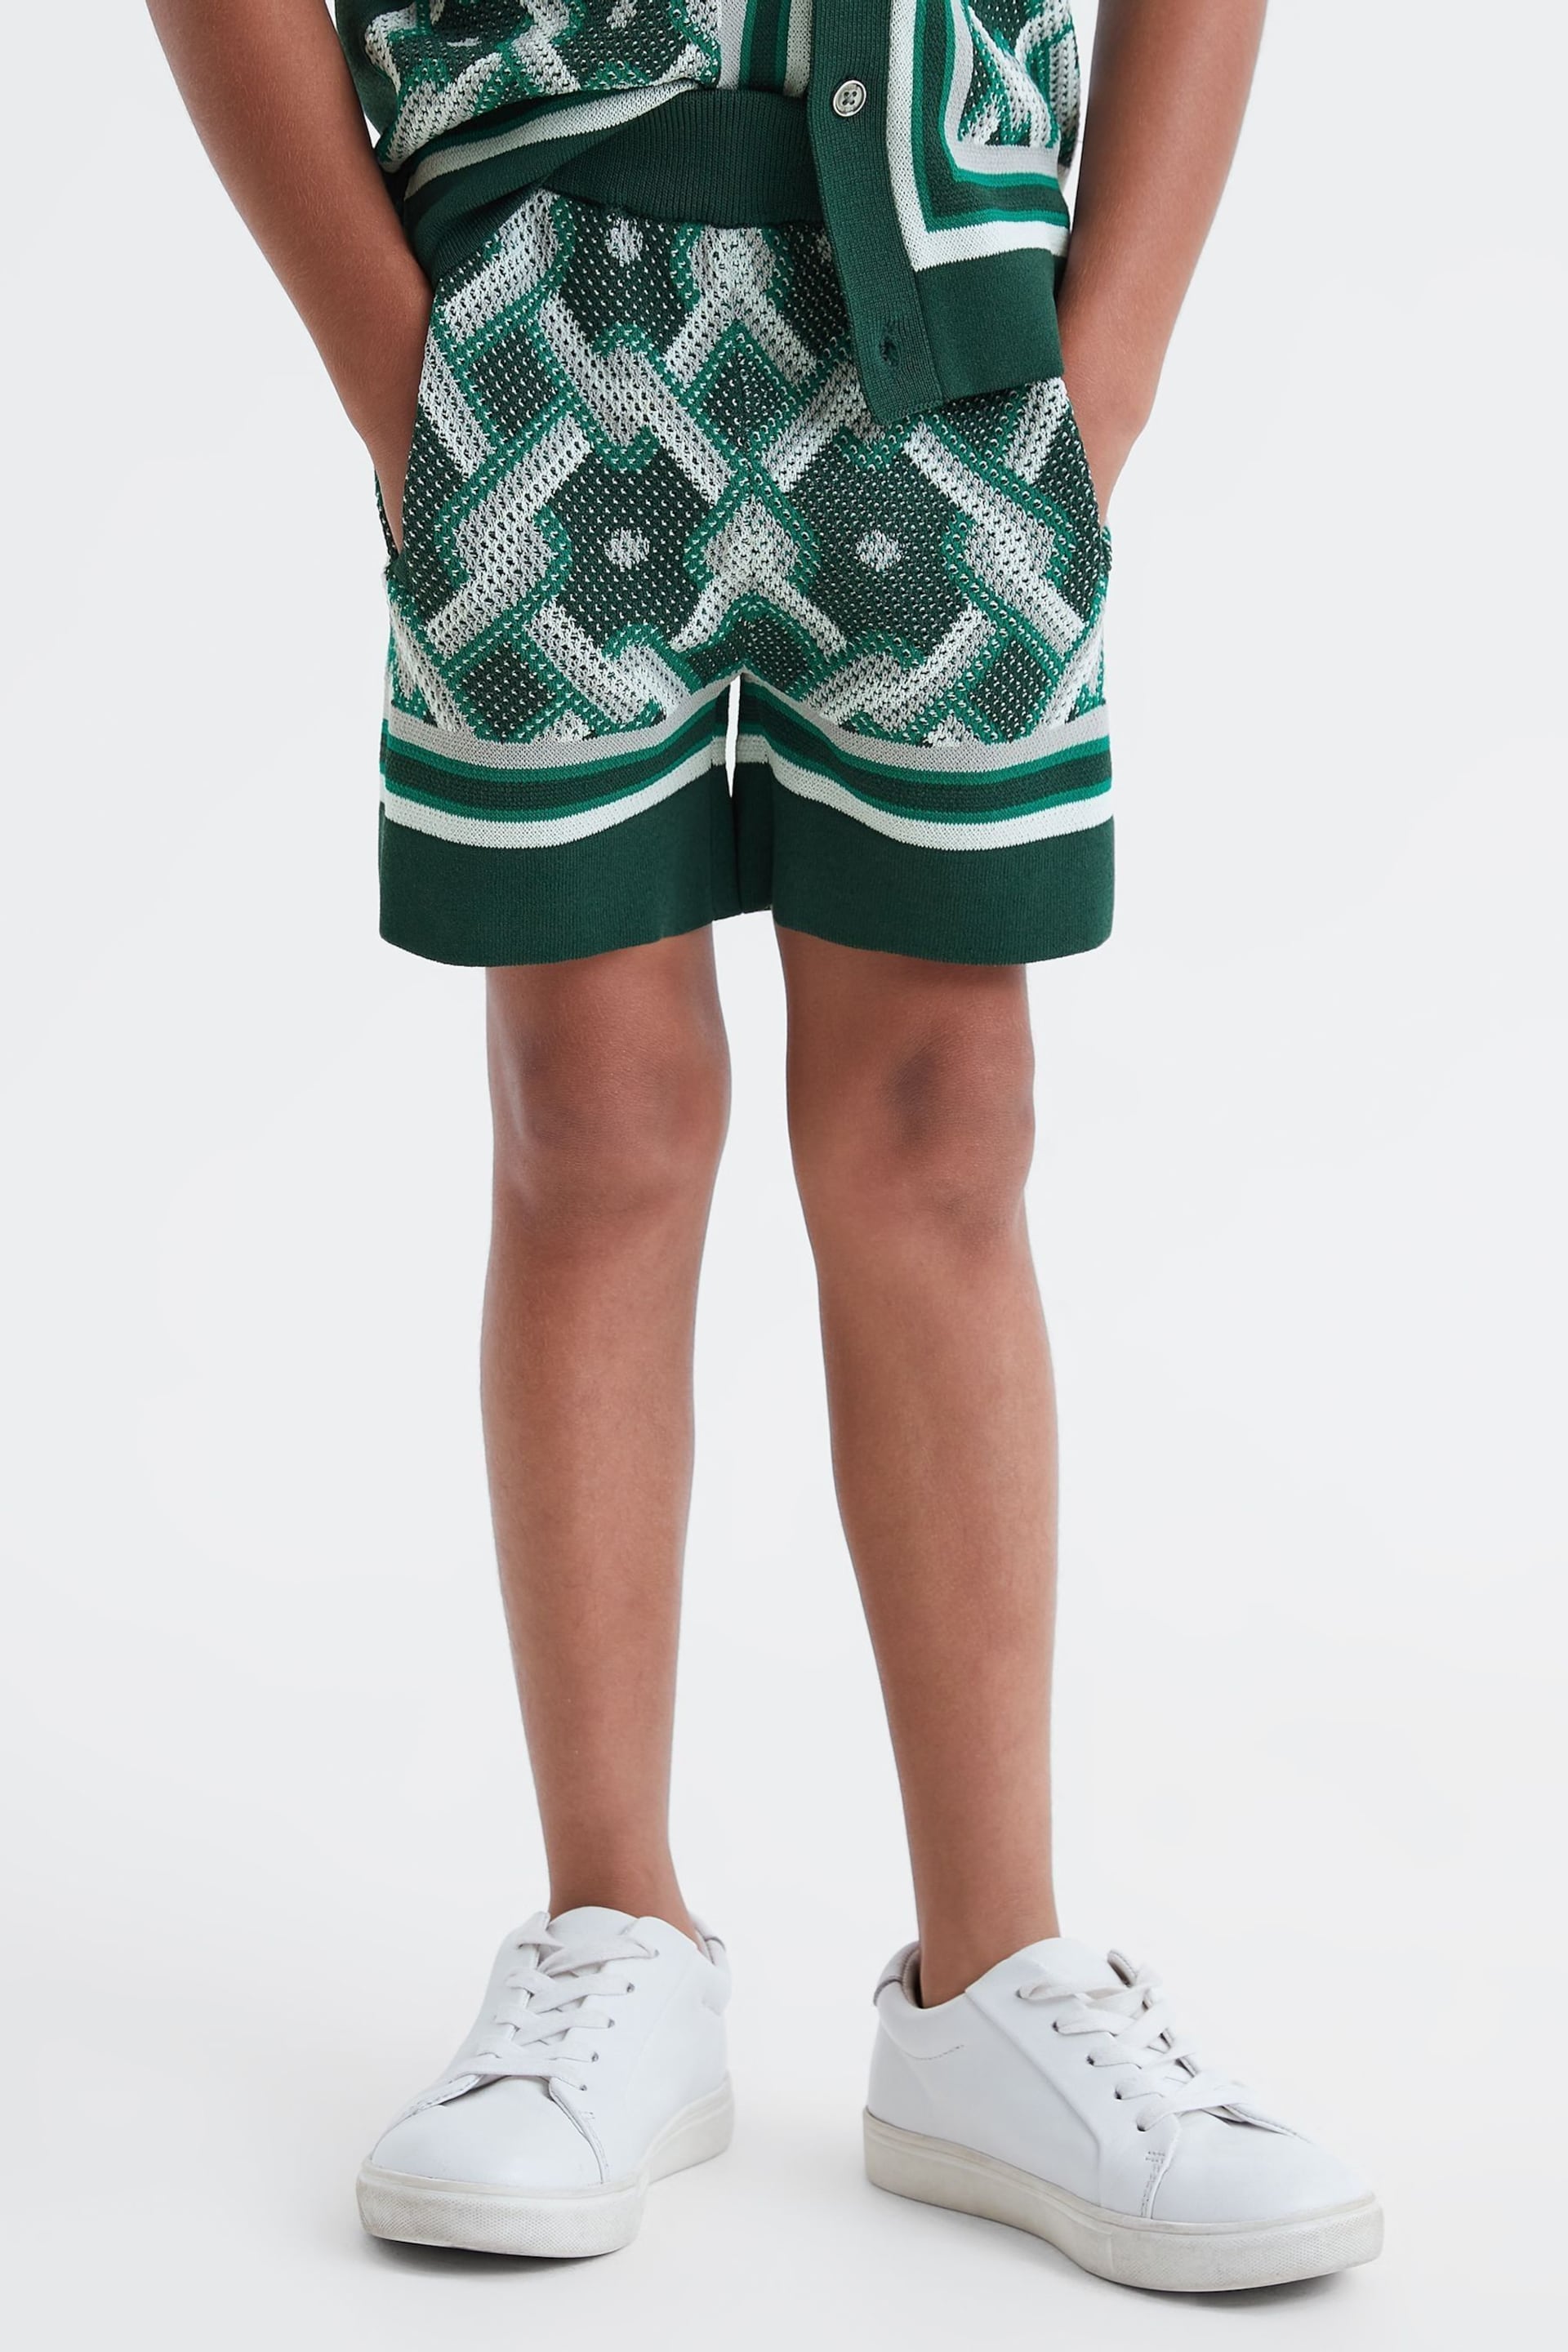 Reiss Green Multi Jack Teen Knitted Elasticated Waistband Shorts - Image 3 of 6